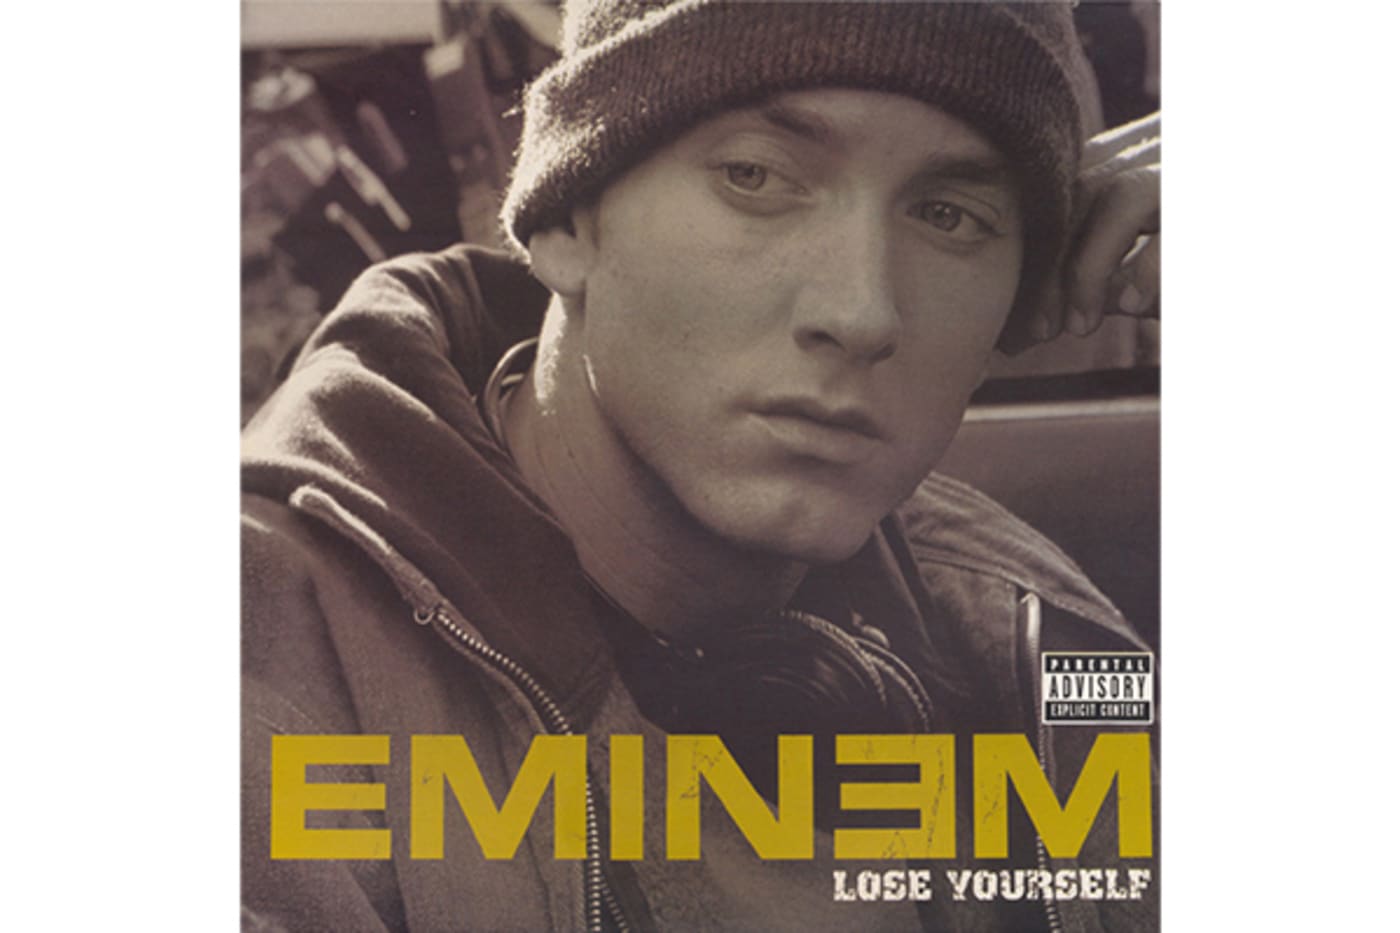 Lose yourself на русском текст. Eminem Survival. Lose yourself.